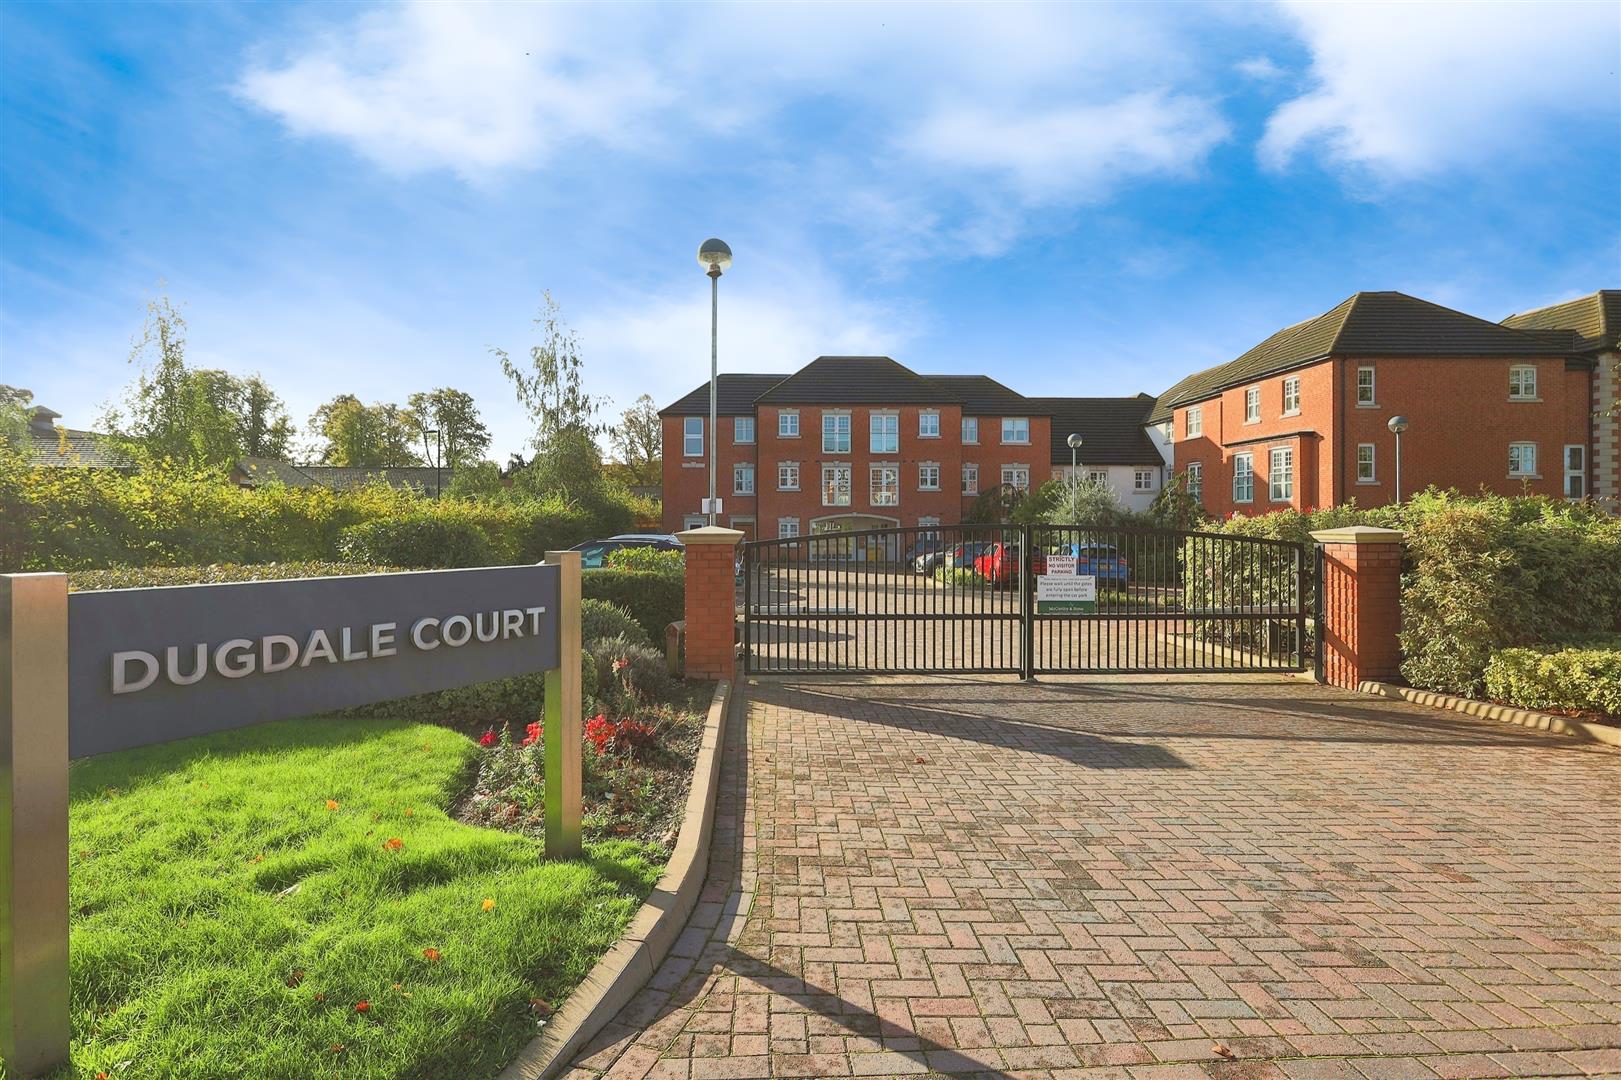 Dugdale Court, Coventry Road, Coleshill, Birmingham, B46 3AT